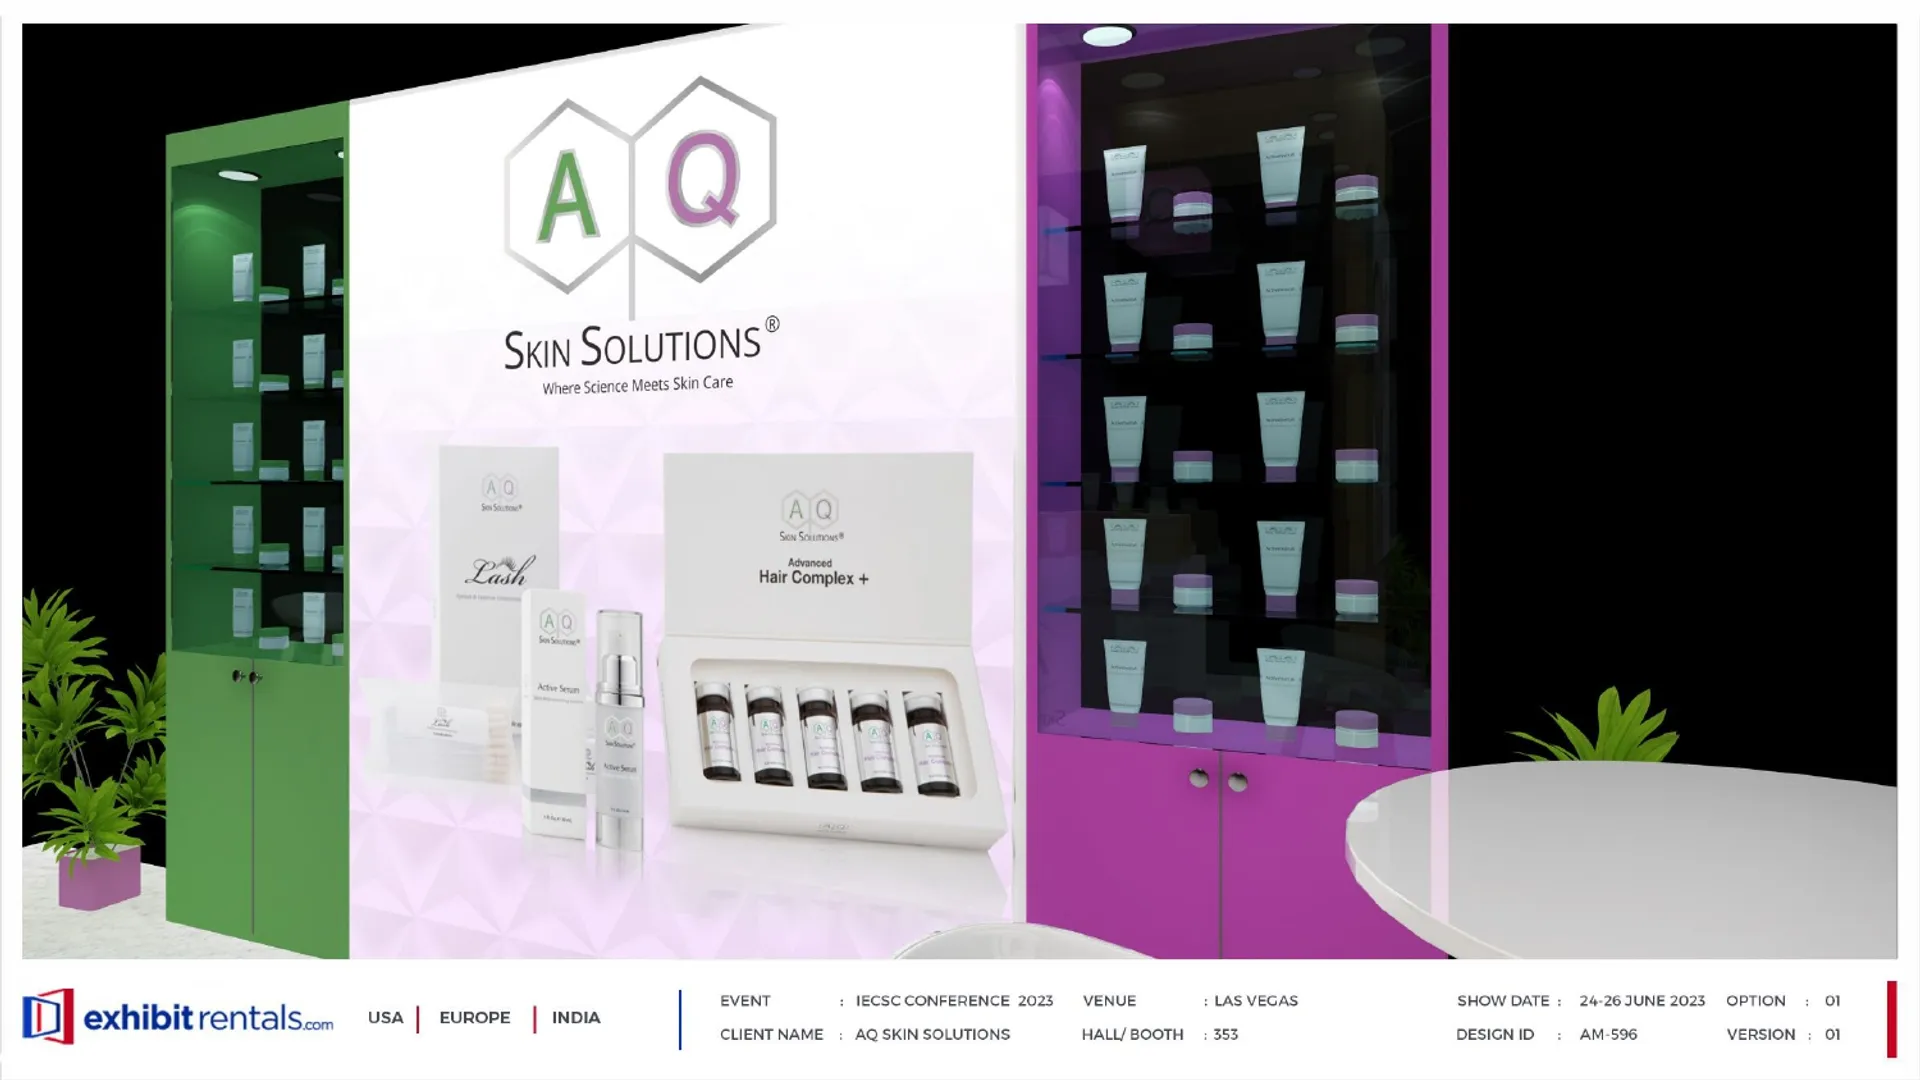 booth-design-projects/Exhibit-Rentals/2024-04-18-20x20-ISLAND-Project-85/1.1_AQ Skin Solutions_IECSC Conference_ER design proposal -24_page-0001-hdurwk.jpg